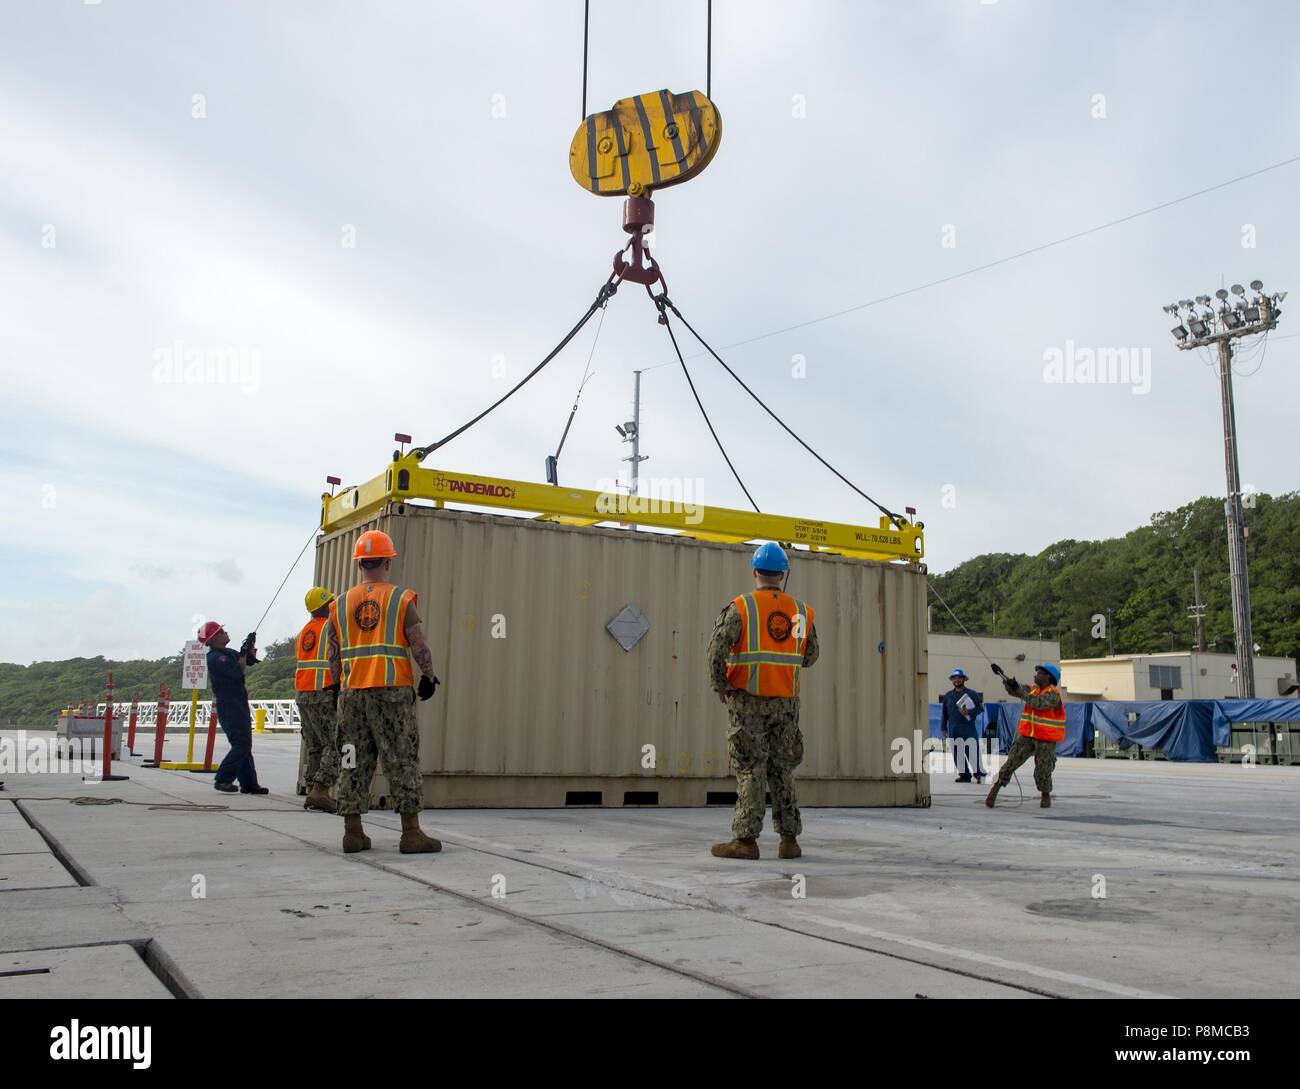 Sailors assigned to Navy Cargo Handling Battalion (NCHB) 1, Det, July 2, 2018. Guam, on load ammo cans to a cargo ship at Naval Base Guam, July 2, 2018. NCHB 1 Det. Guam, assigned to Commander, Task Force 75, is the Navy's only active duty cargo handling battalion, and is a rapidly deployable operating unit of the Navy Expeditionary Combat Command, capable of loading and discharging ships and aircraft in all climatic and threat conditions. (U.S. Navy photo by Mass Communication Specialist 3rd Class Kryzentia Richards). () Stock Photo